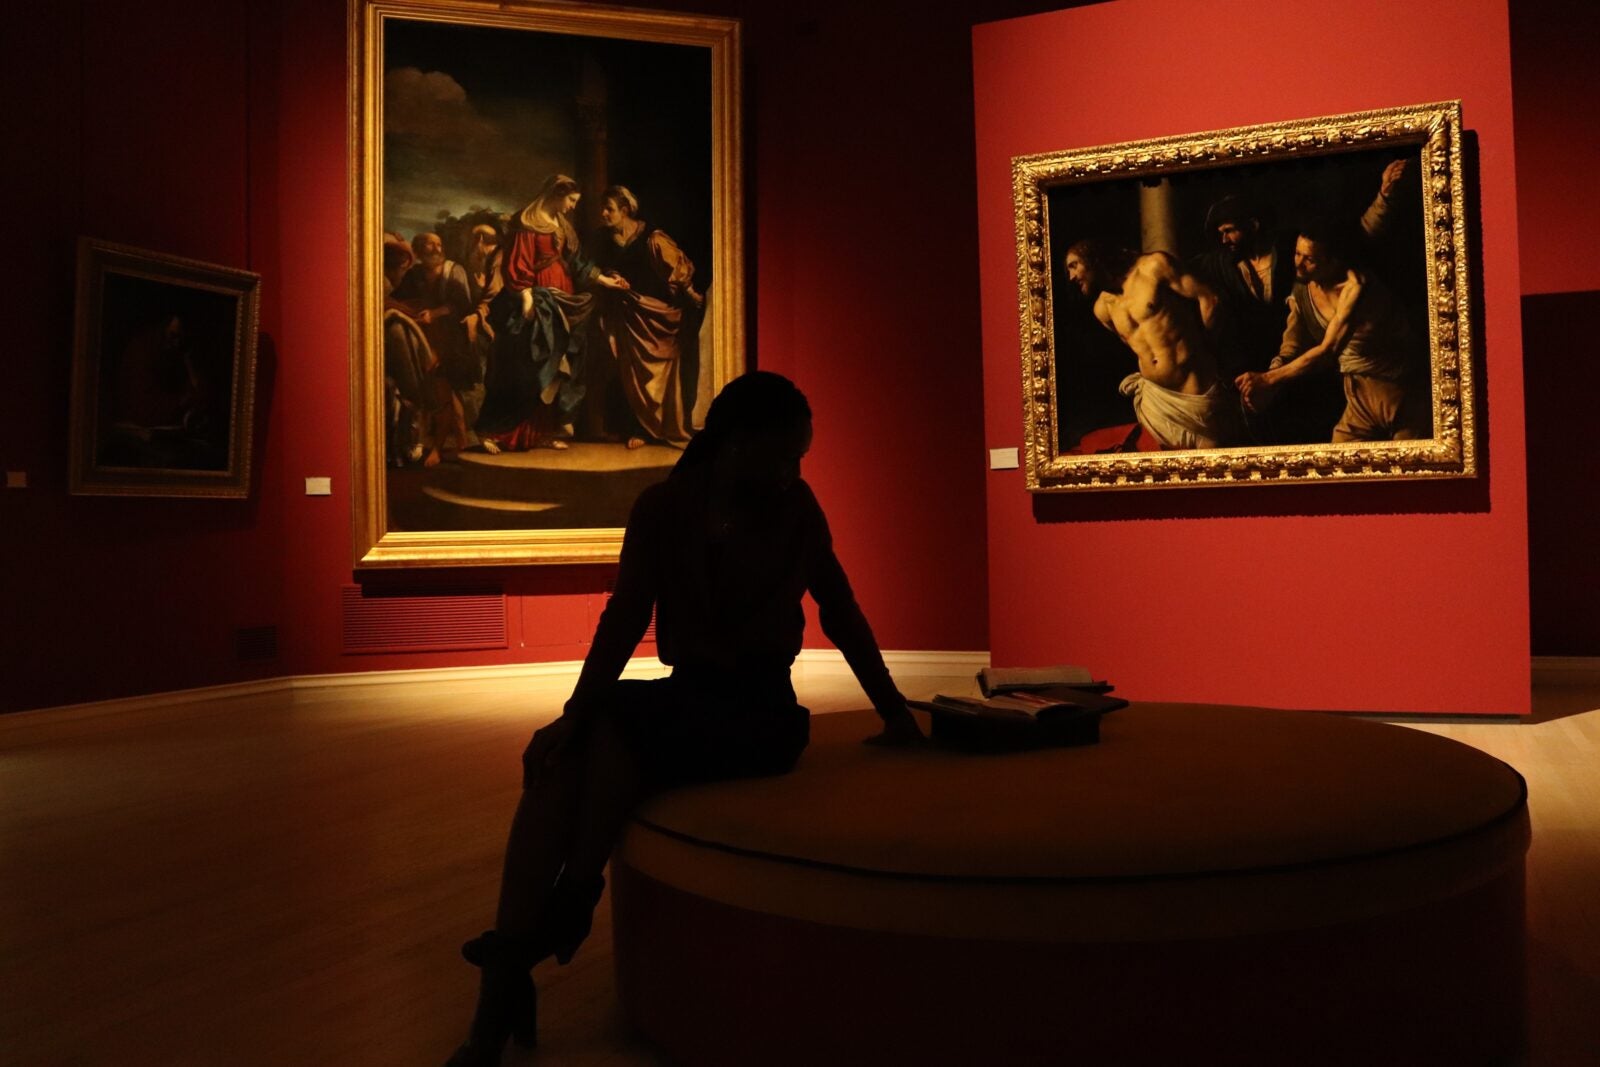 Silhouette of a woman sitting on a round chair in a museum.